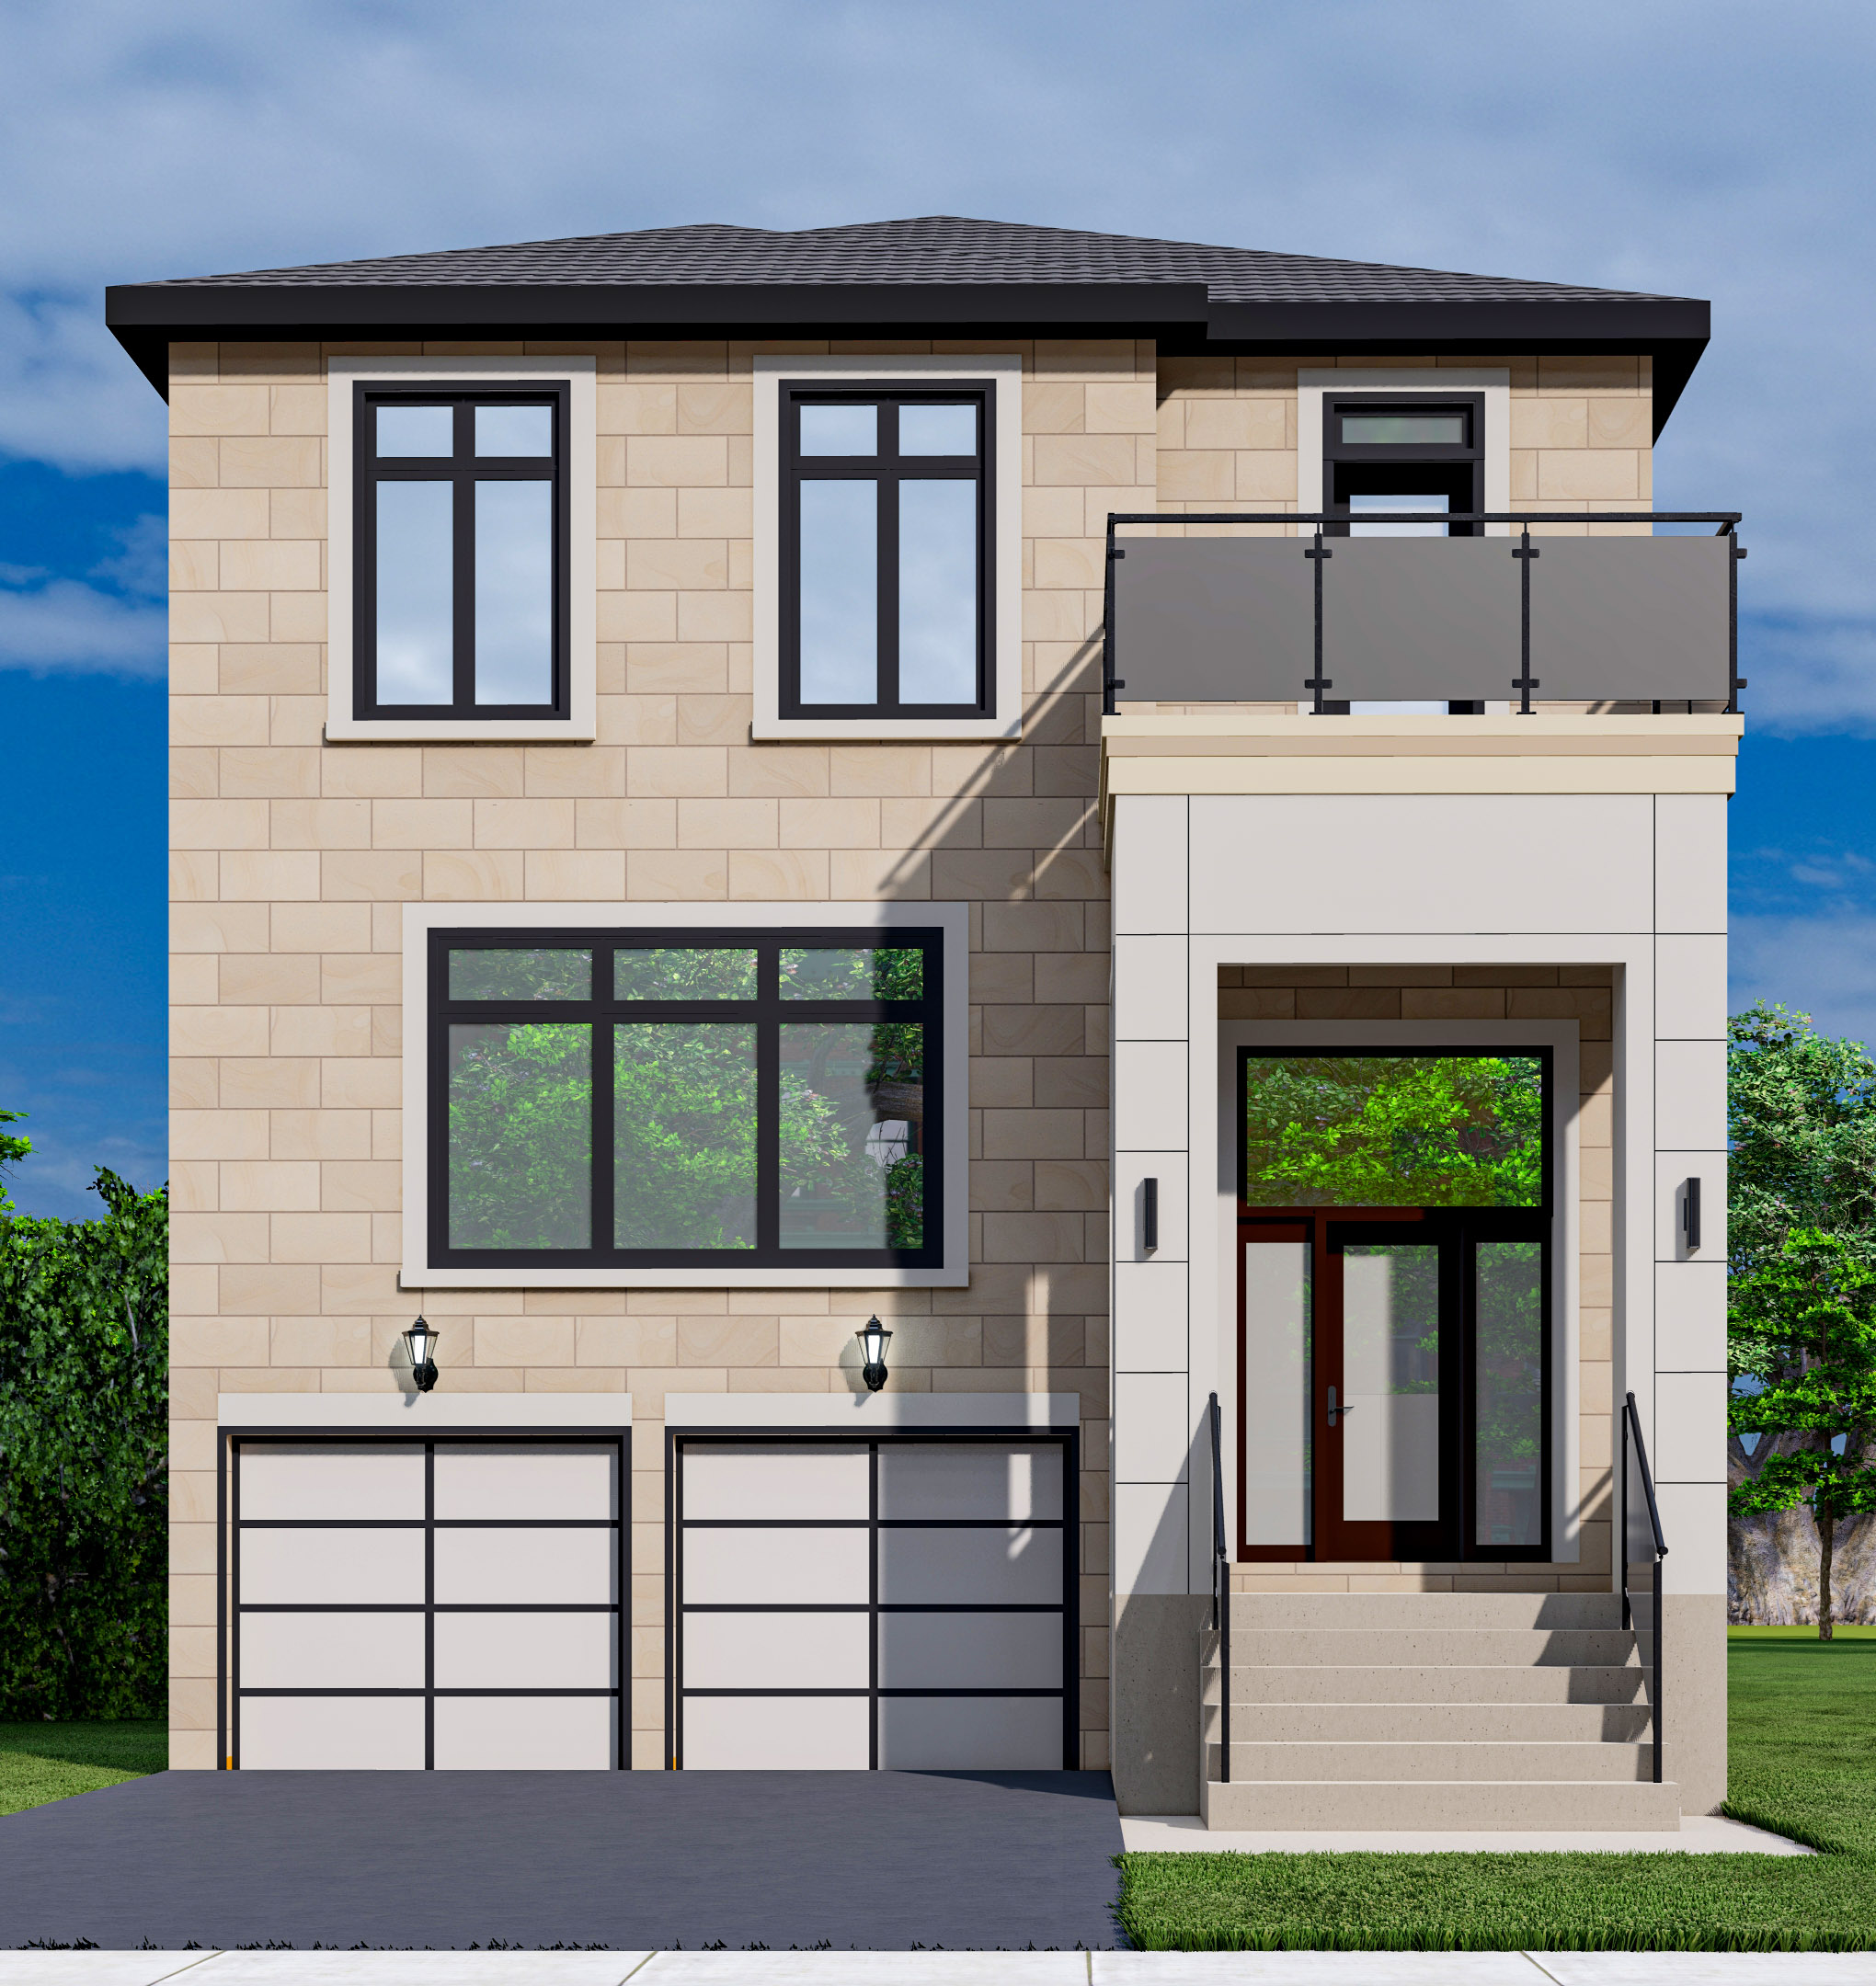 The Athabasca detached Homes - Smart Castle Homes